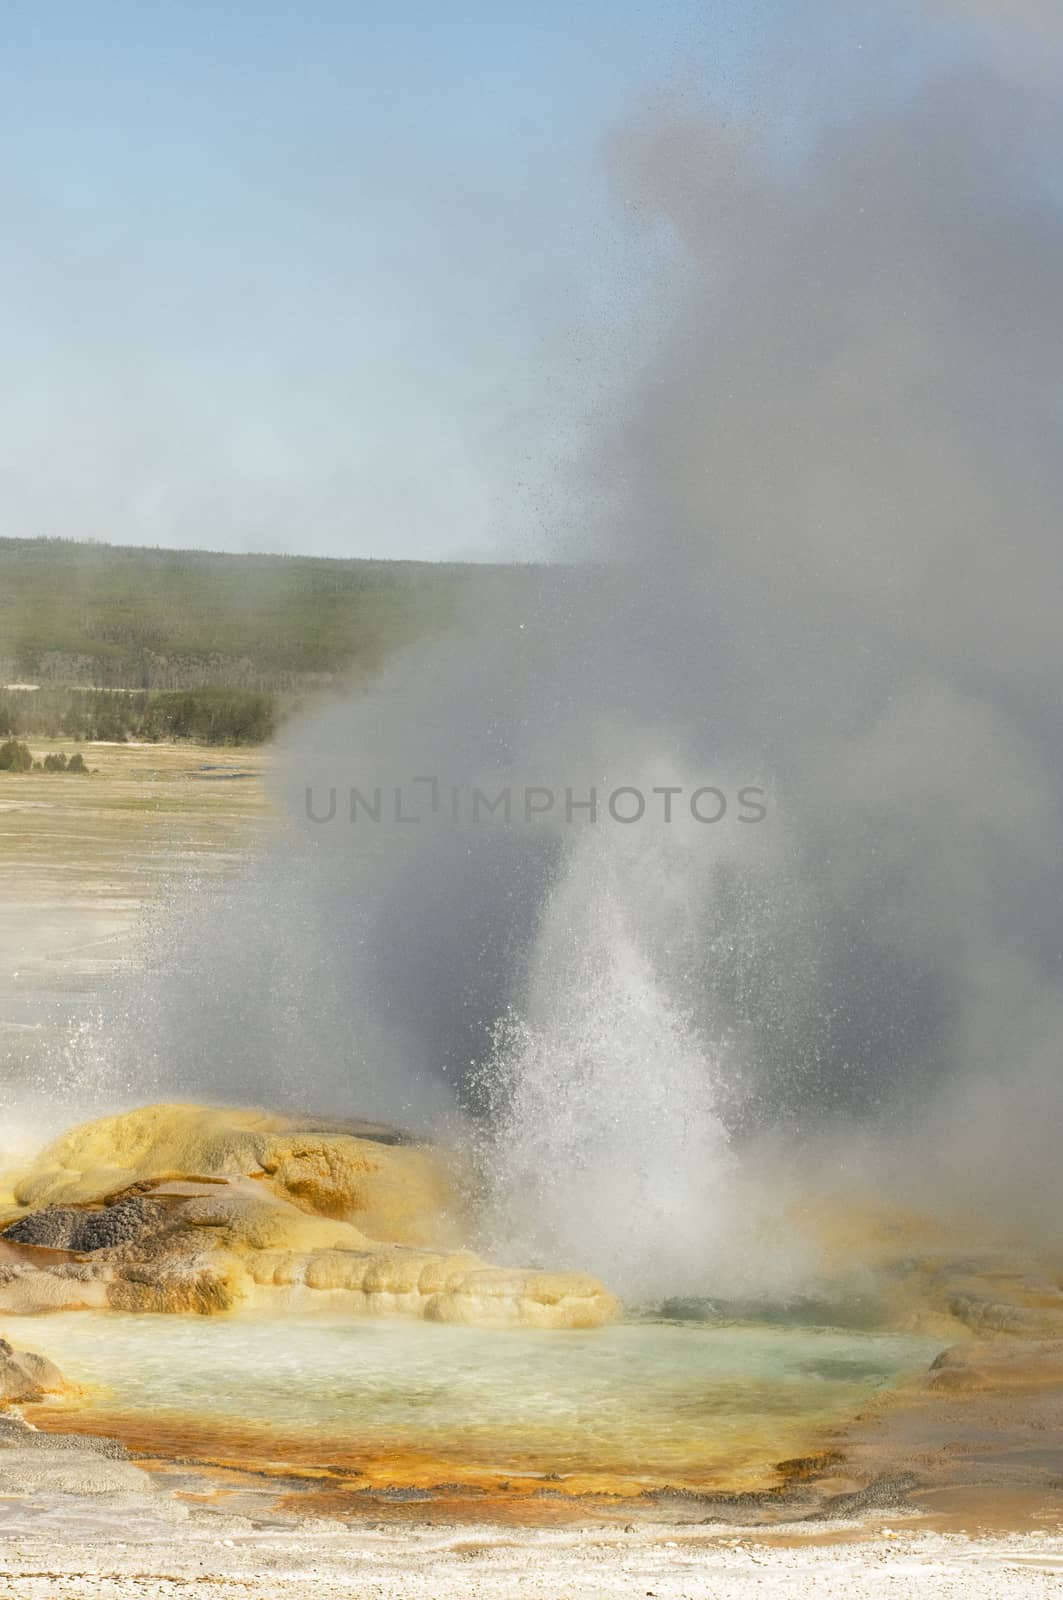 Spasm Geyer erupting and fuming in Fountain Paint Pots area in Y by Njean